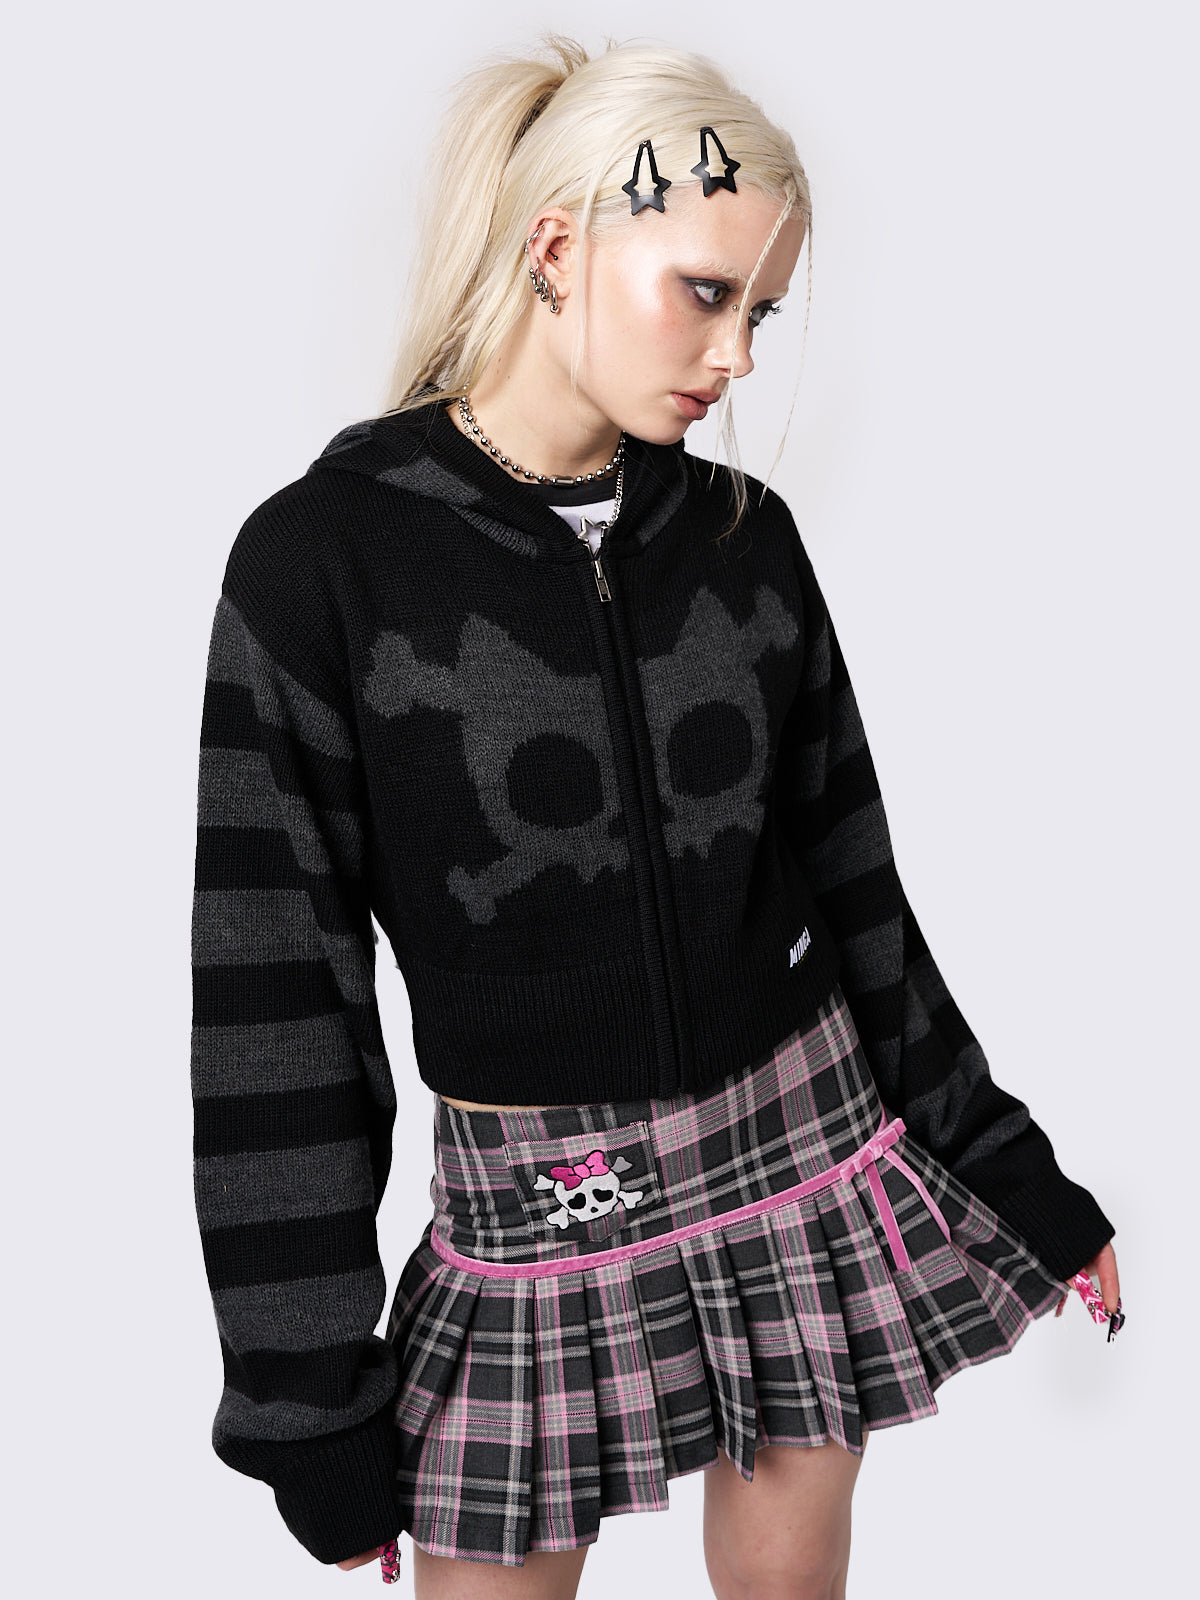 Skull Cropped Zip Up Knitted Hoodie in Black and Grey